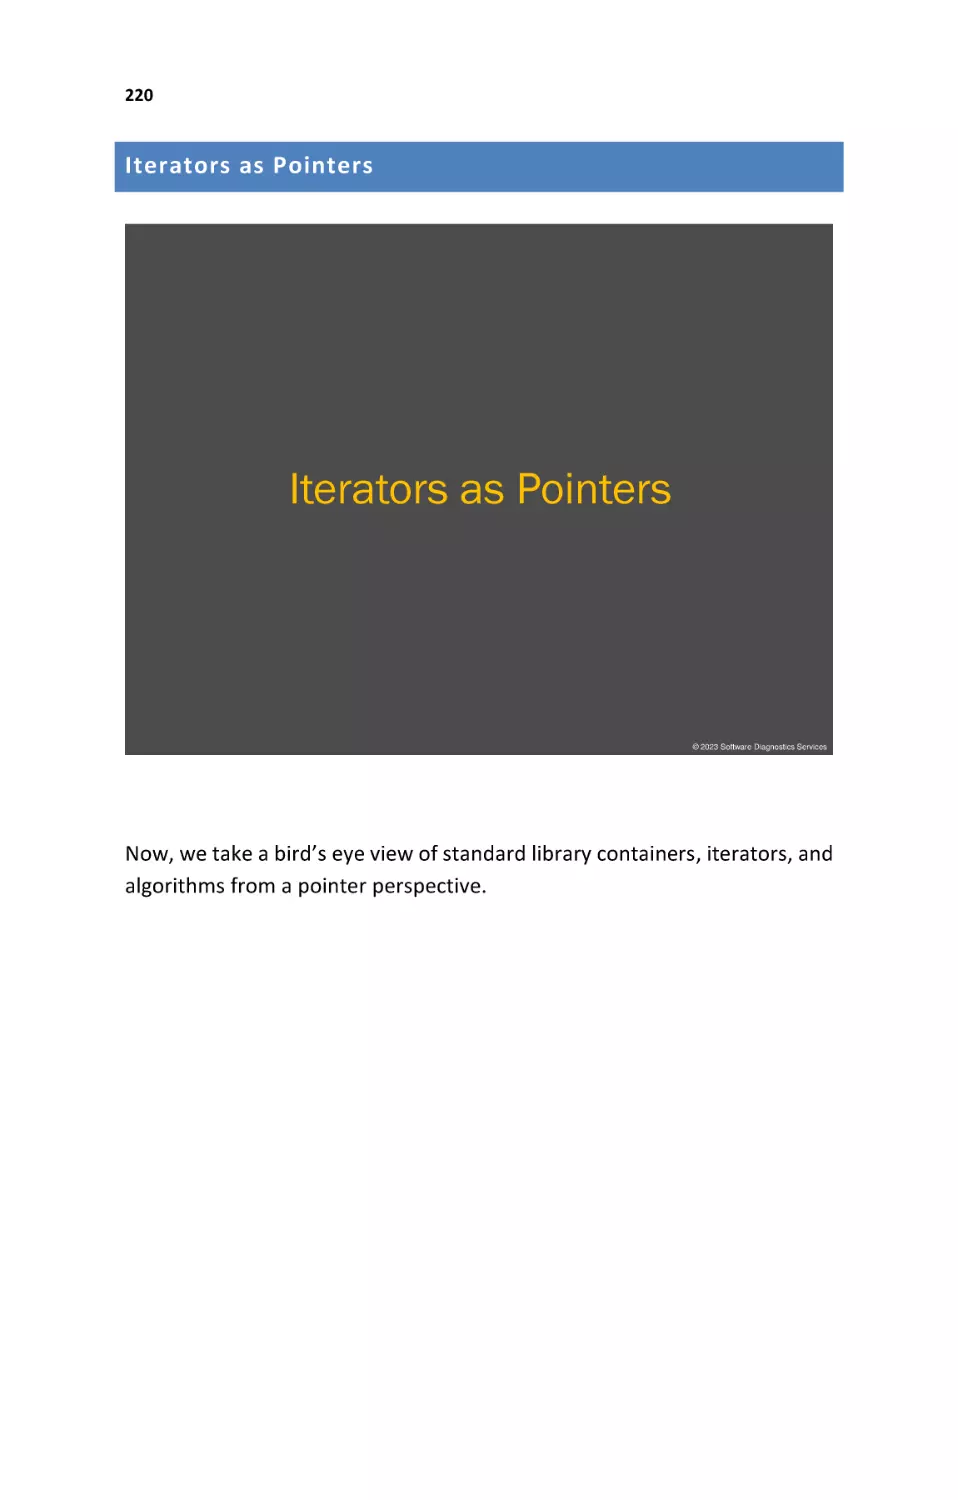 Iterators as Pointers